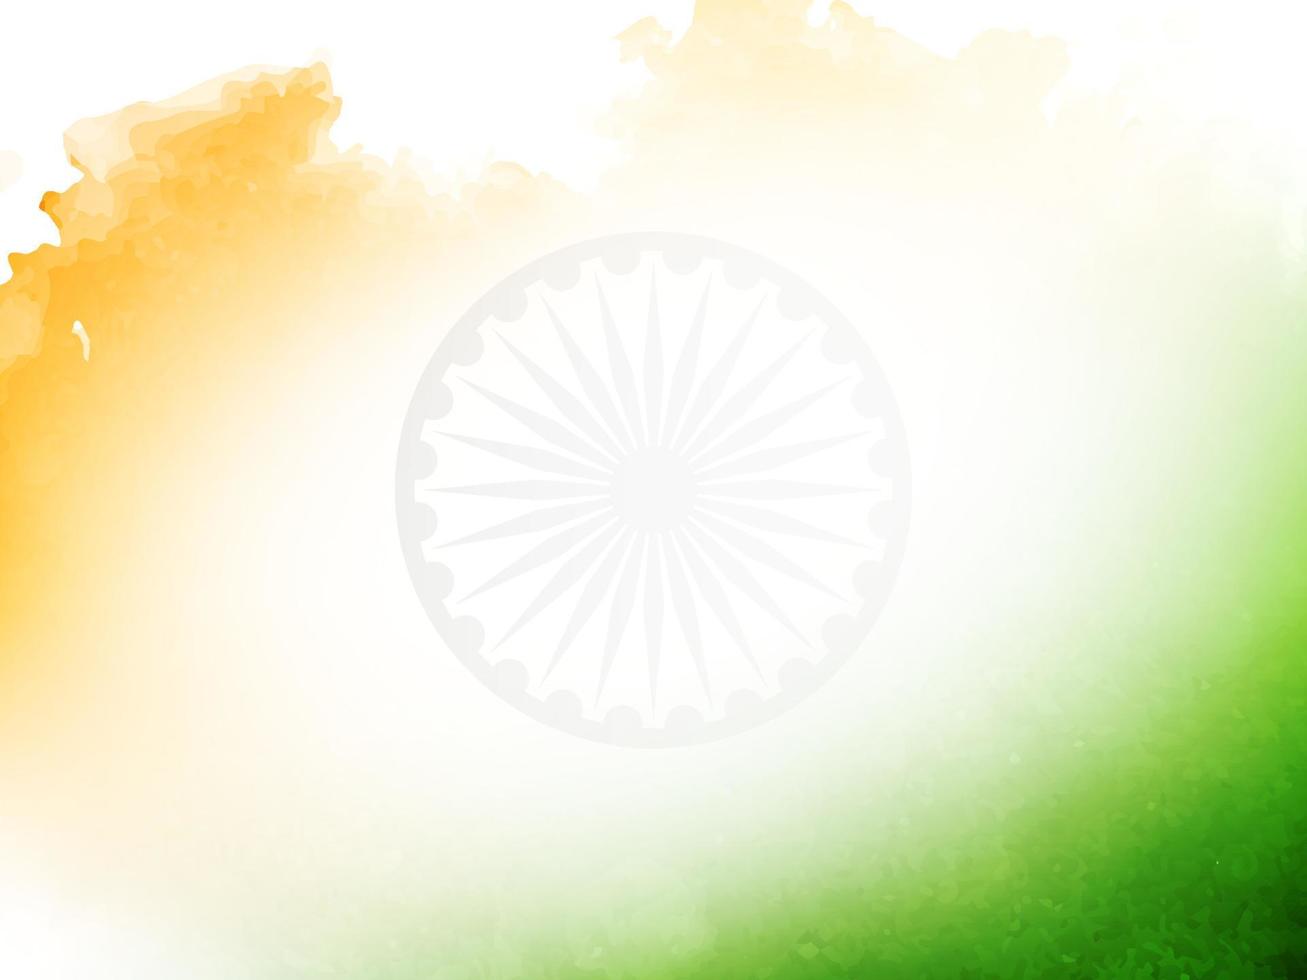 Indian flag theme Republic day watercolor texture decorative background vector